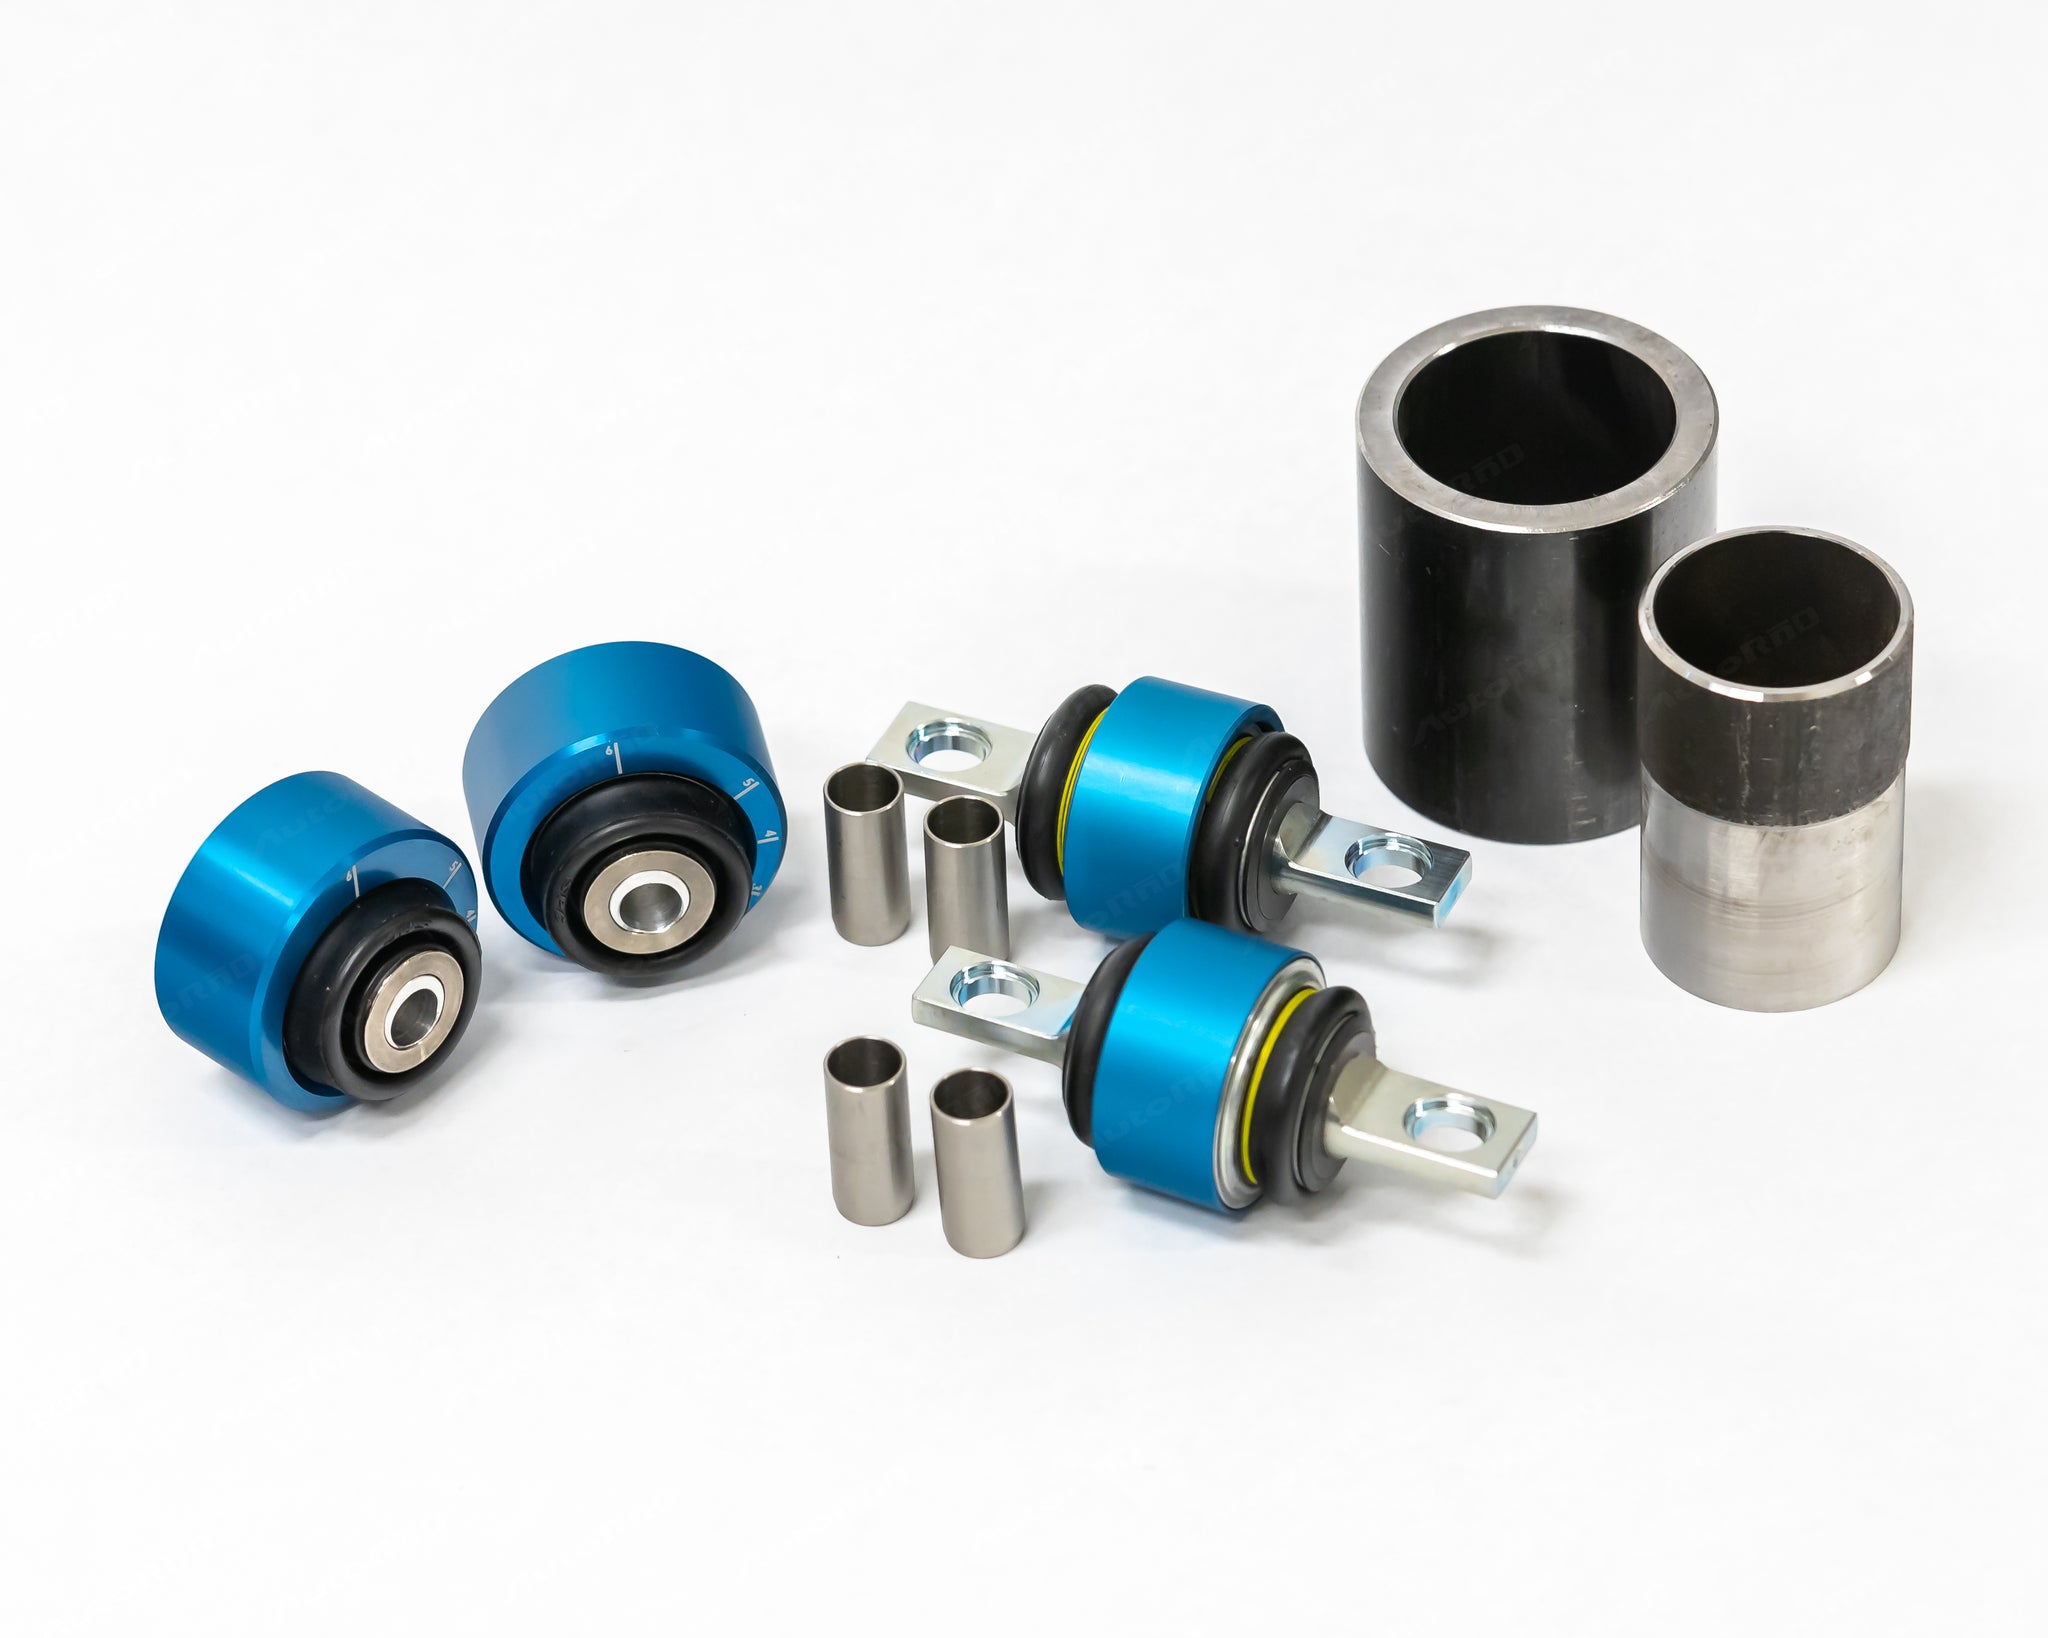 MPP.R Model 3 Front Lower Bearings (All four)